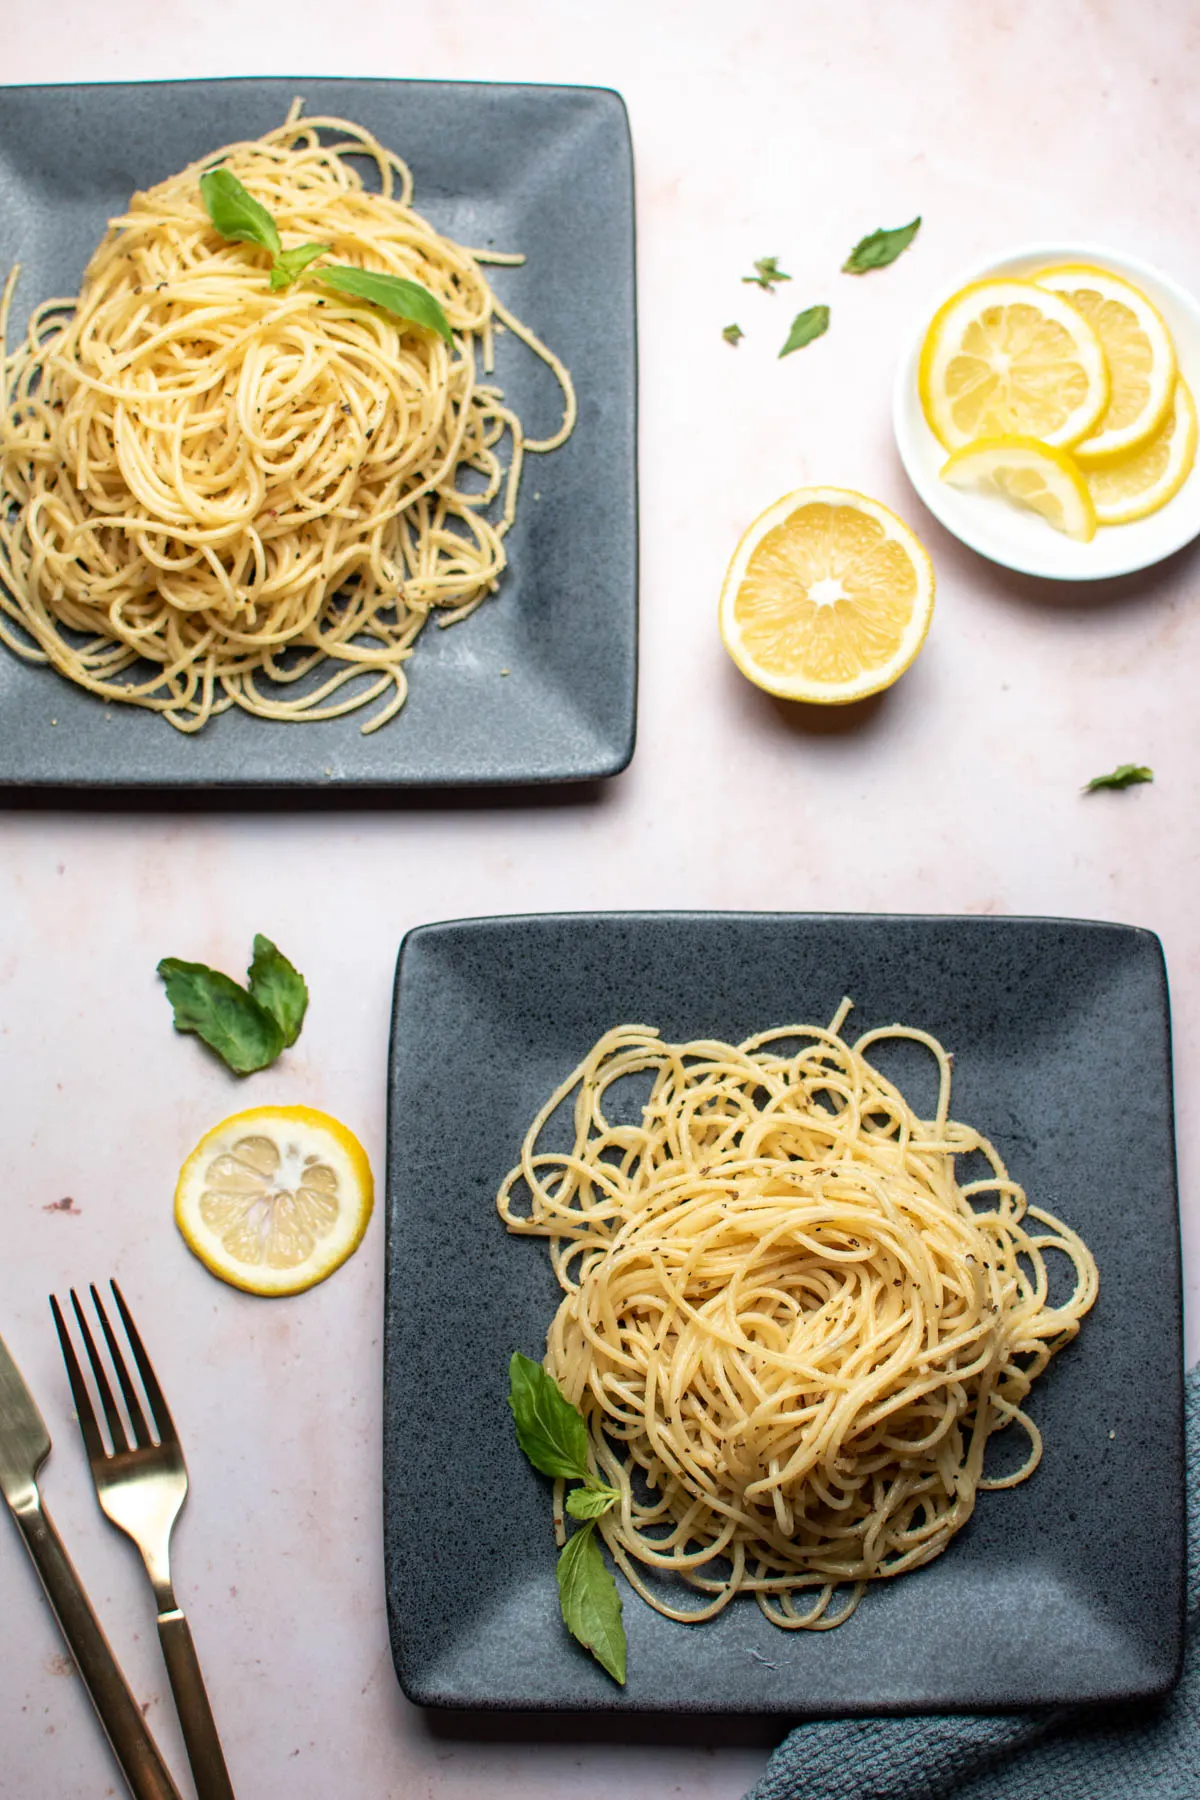 Two gray square plates with lemon and basil pasta, fresh lemon slices, and gold utensils on countertop.